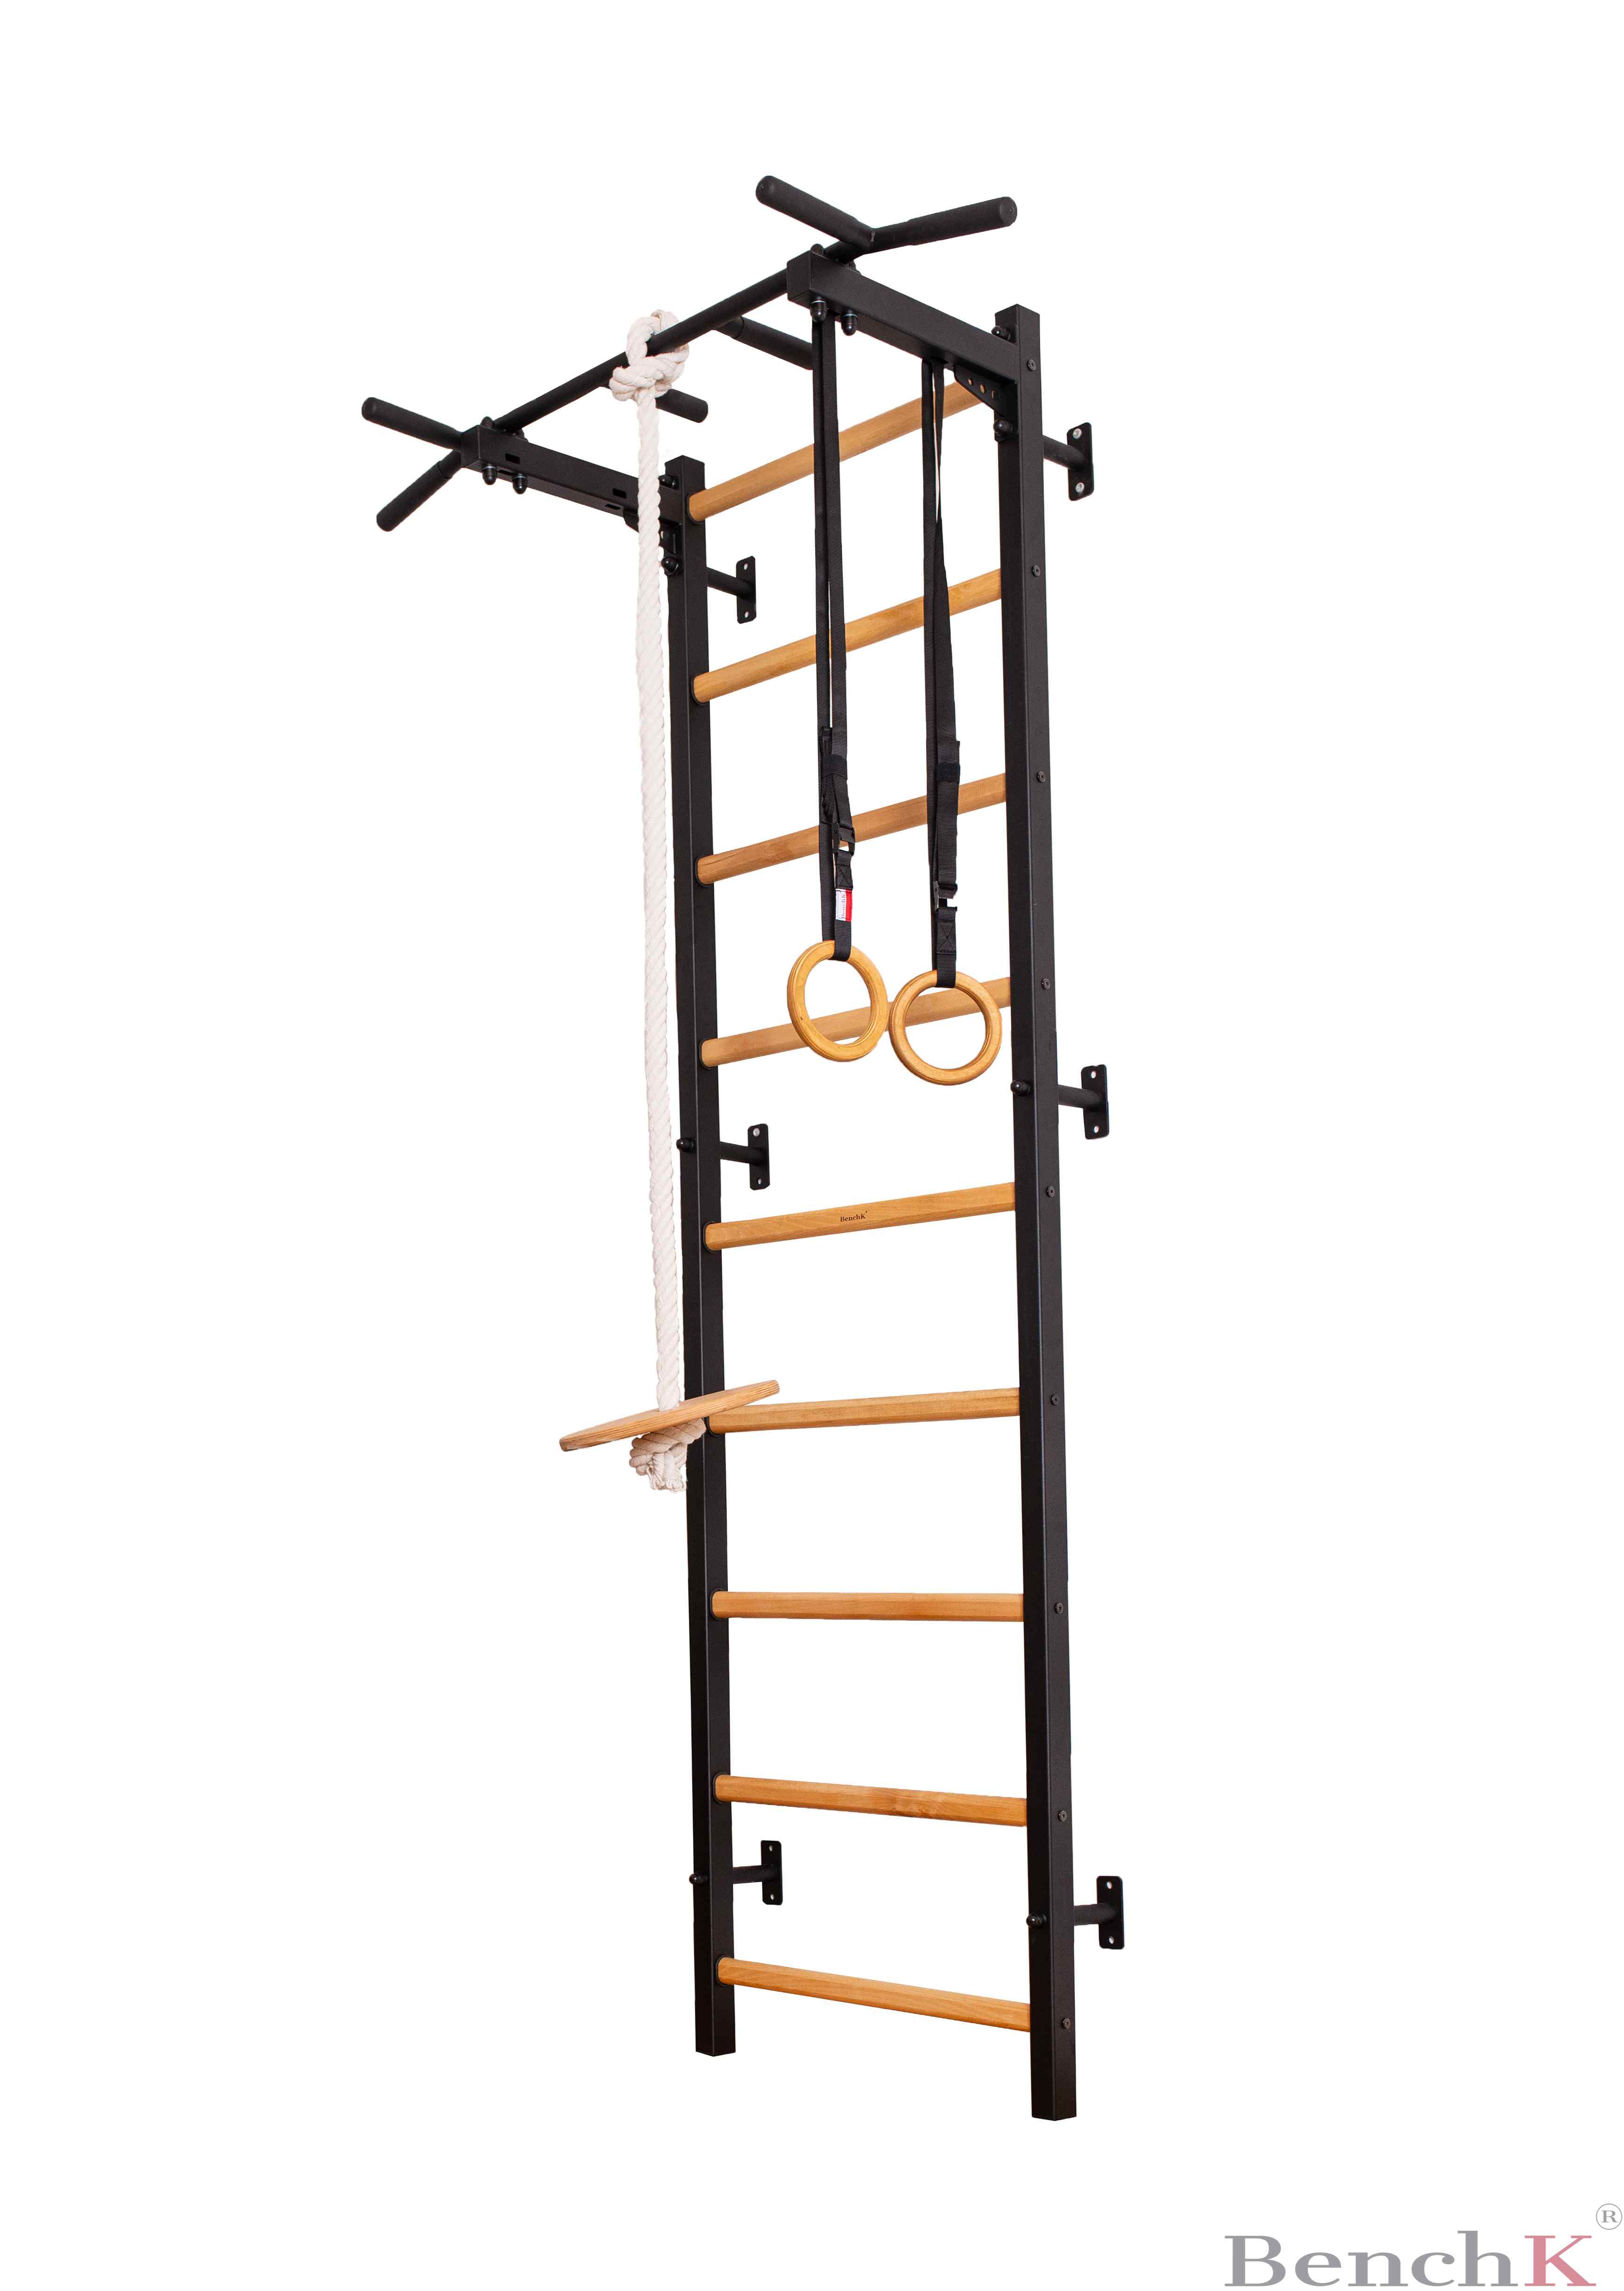 BenchK 721 Wall Bars with Gymnastics Accessories Swedish Ladder Home Gym Equipment